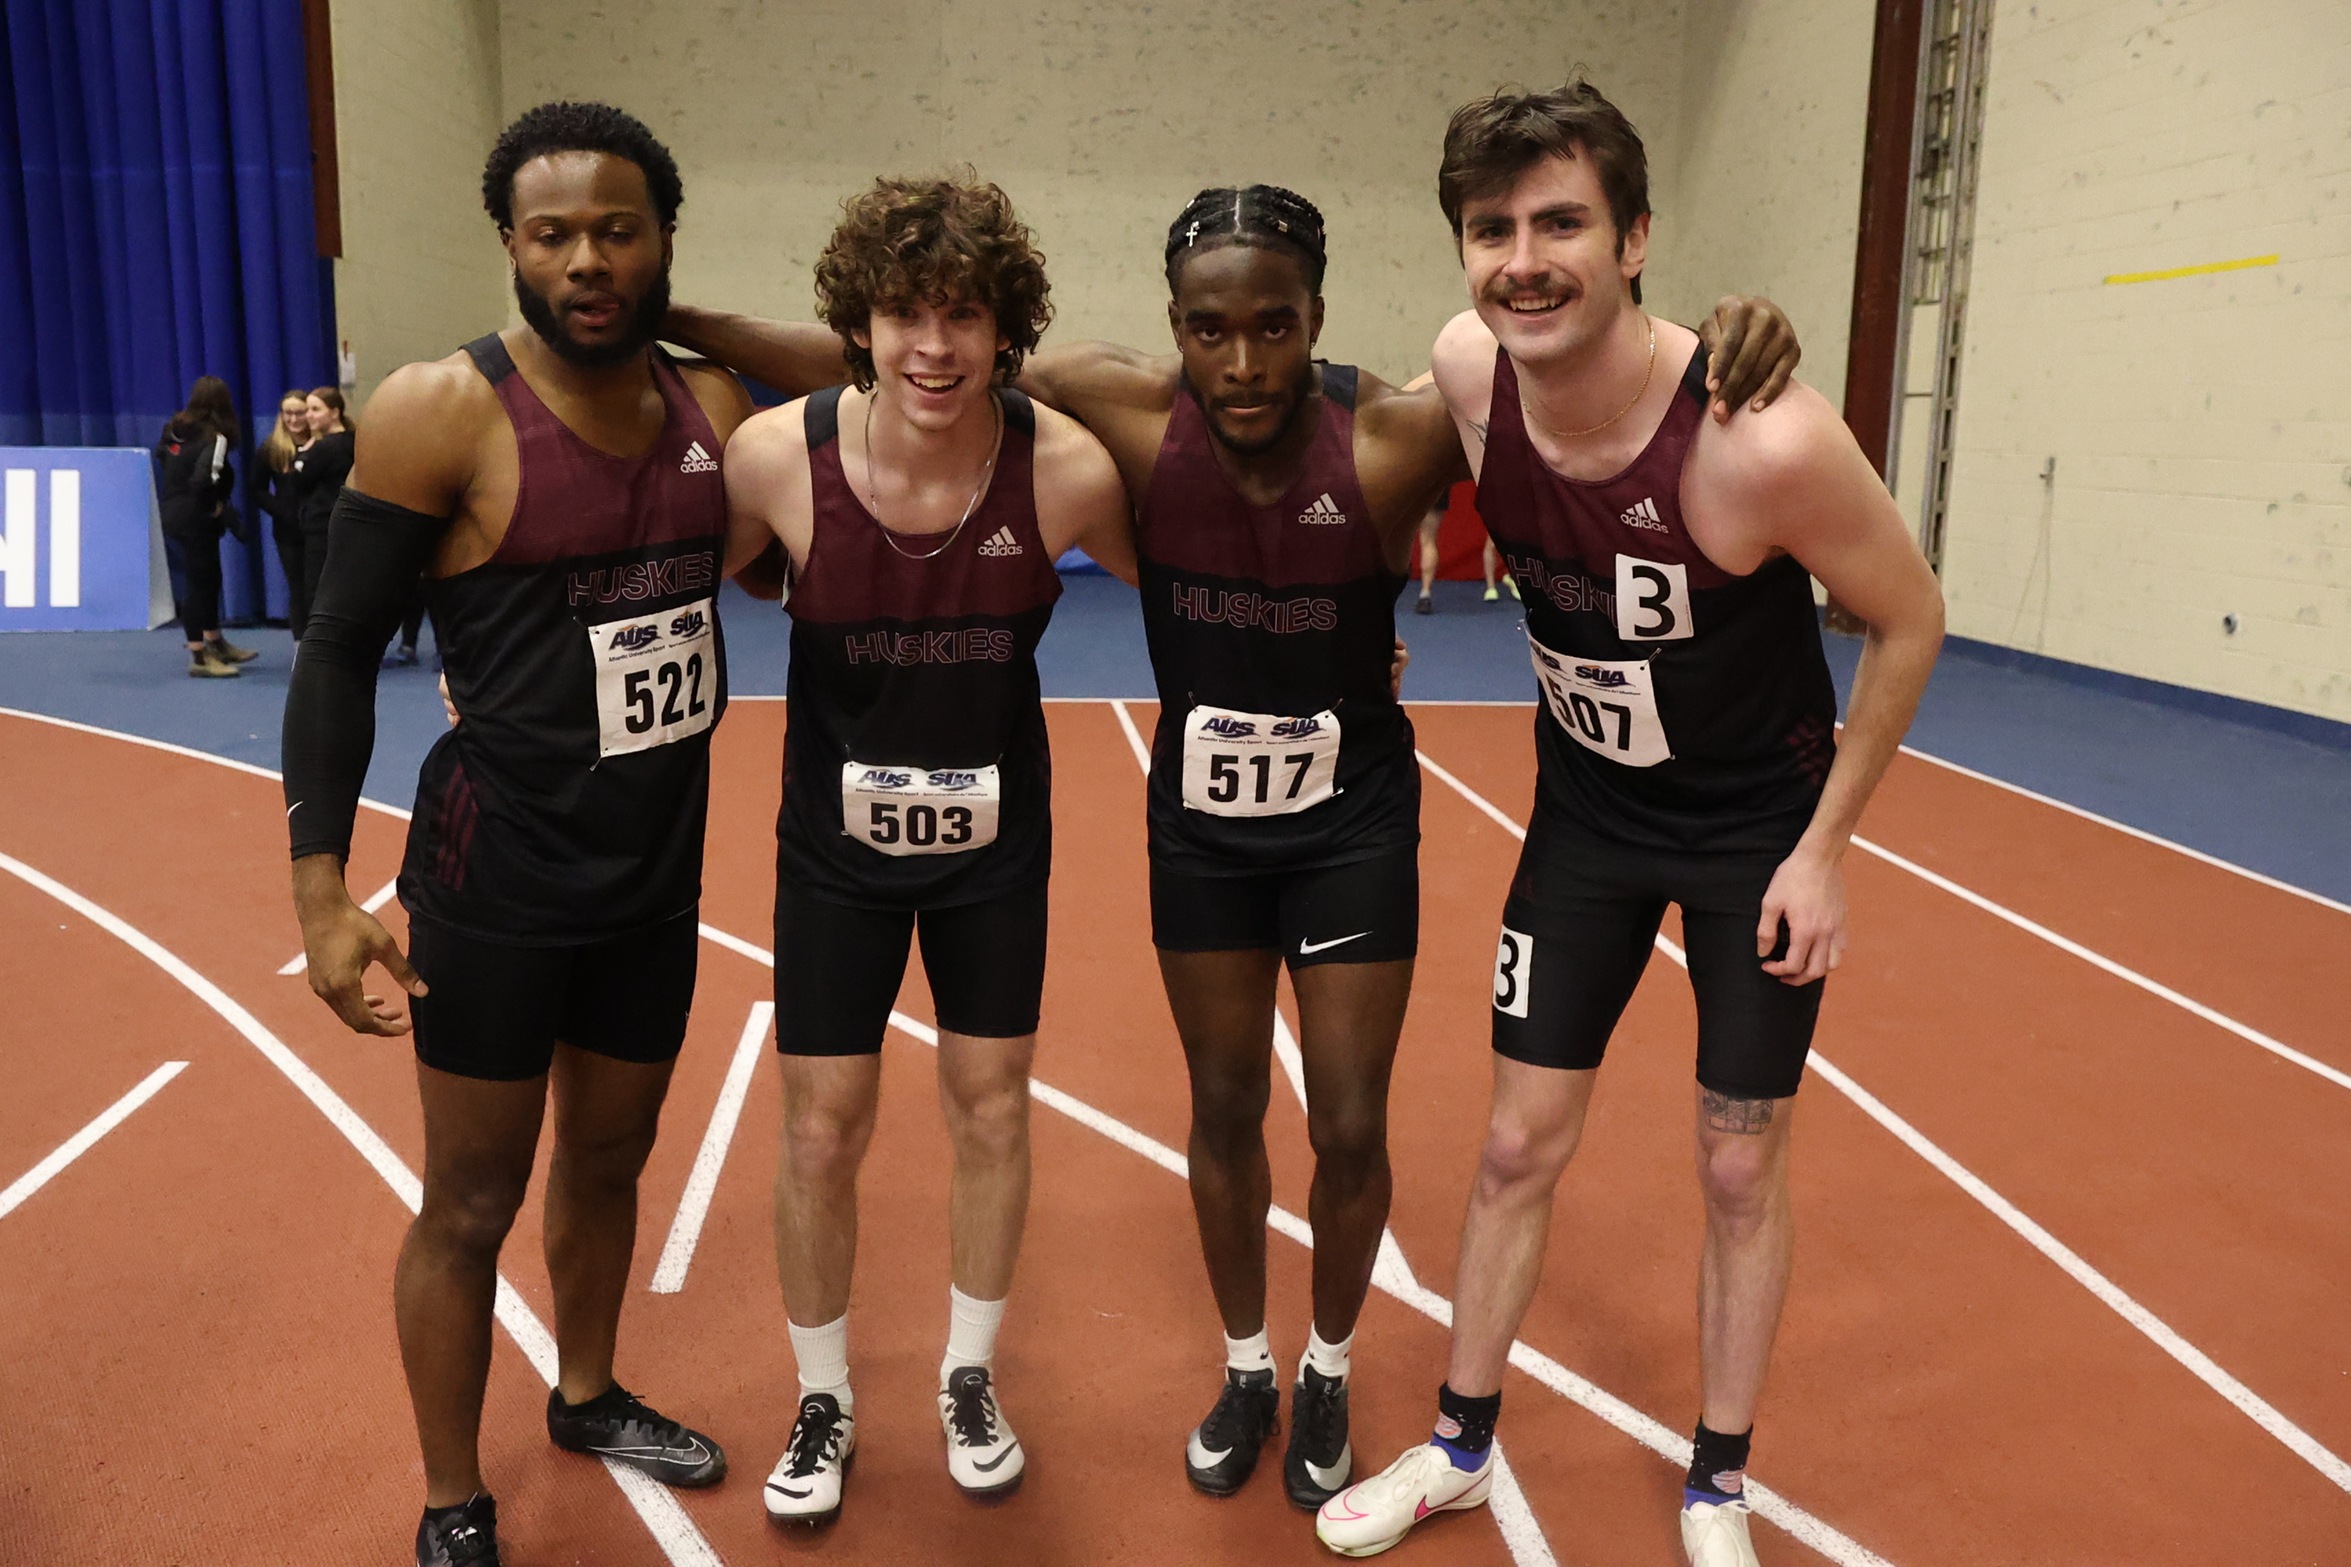 Huskies men's 4x200m relay wins gold to highlight solid day one of AUS Championships in Moncton